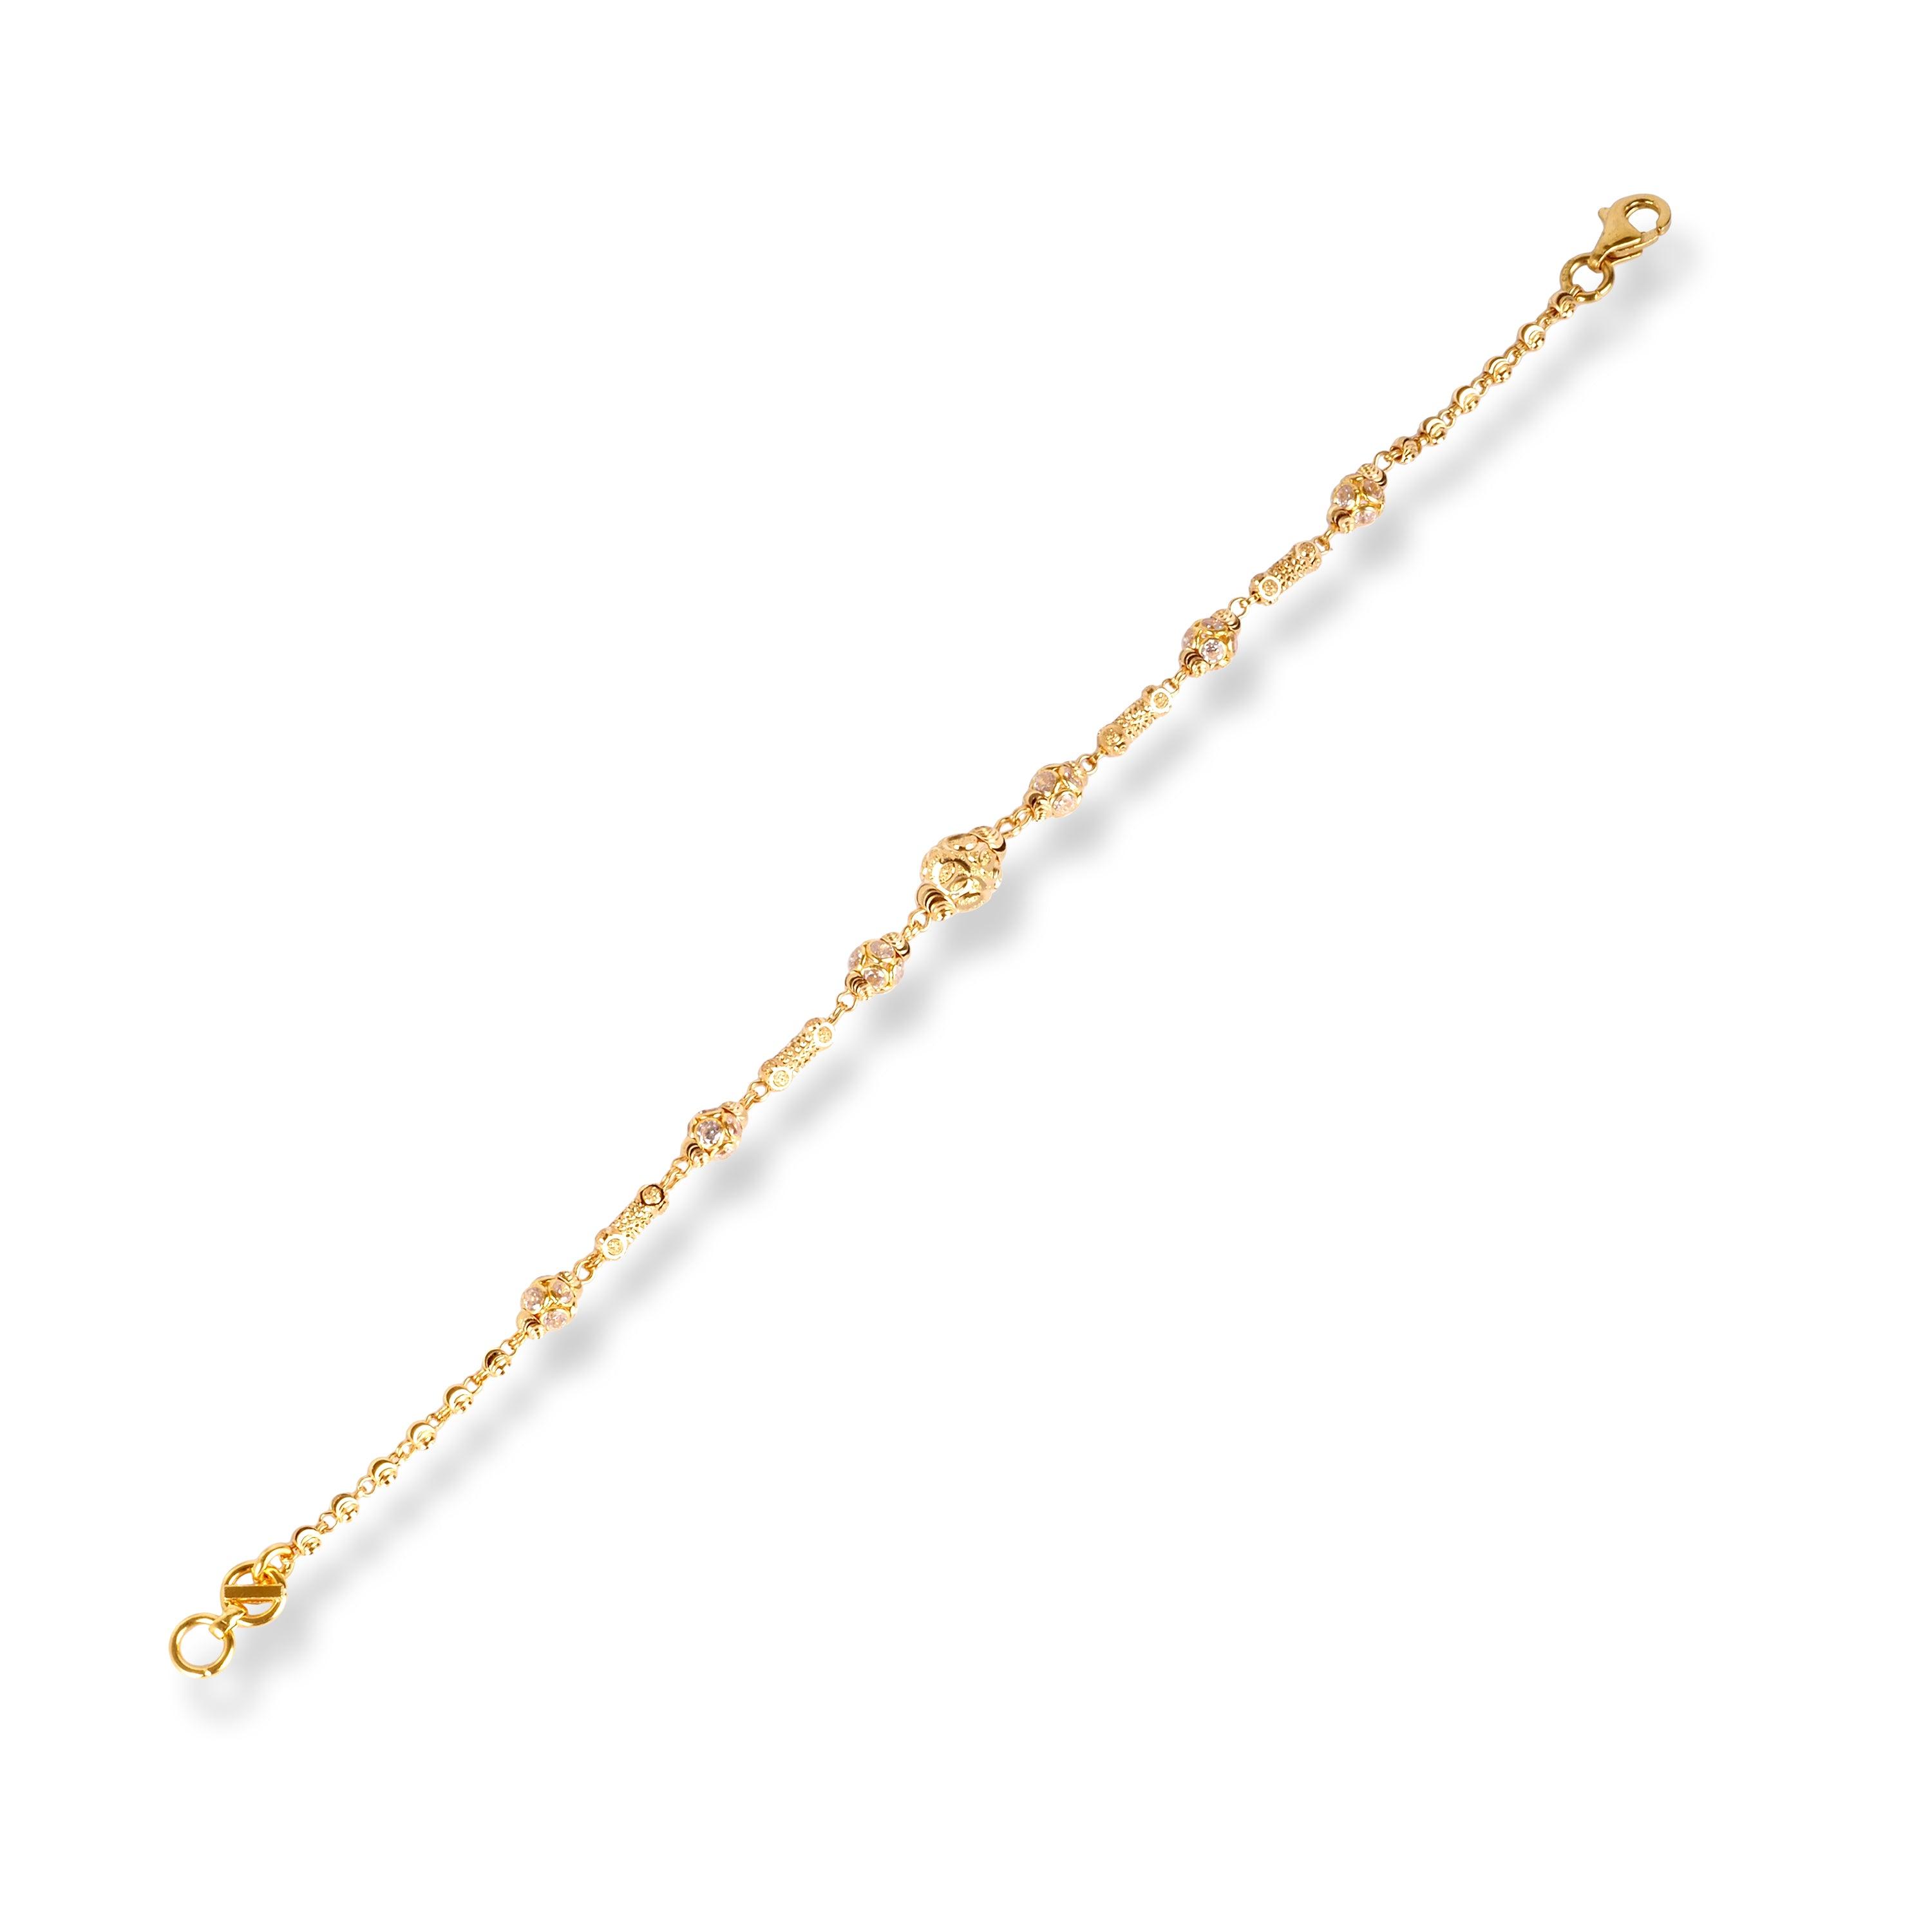 22ct Gold Bracelet with Diamond Cut Beads and Cubic Zirconia Stones LBR-8480 - Minar Jewellers